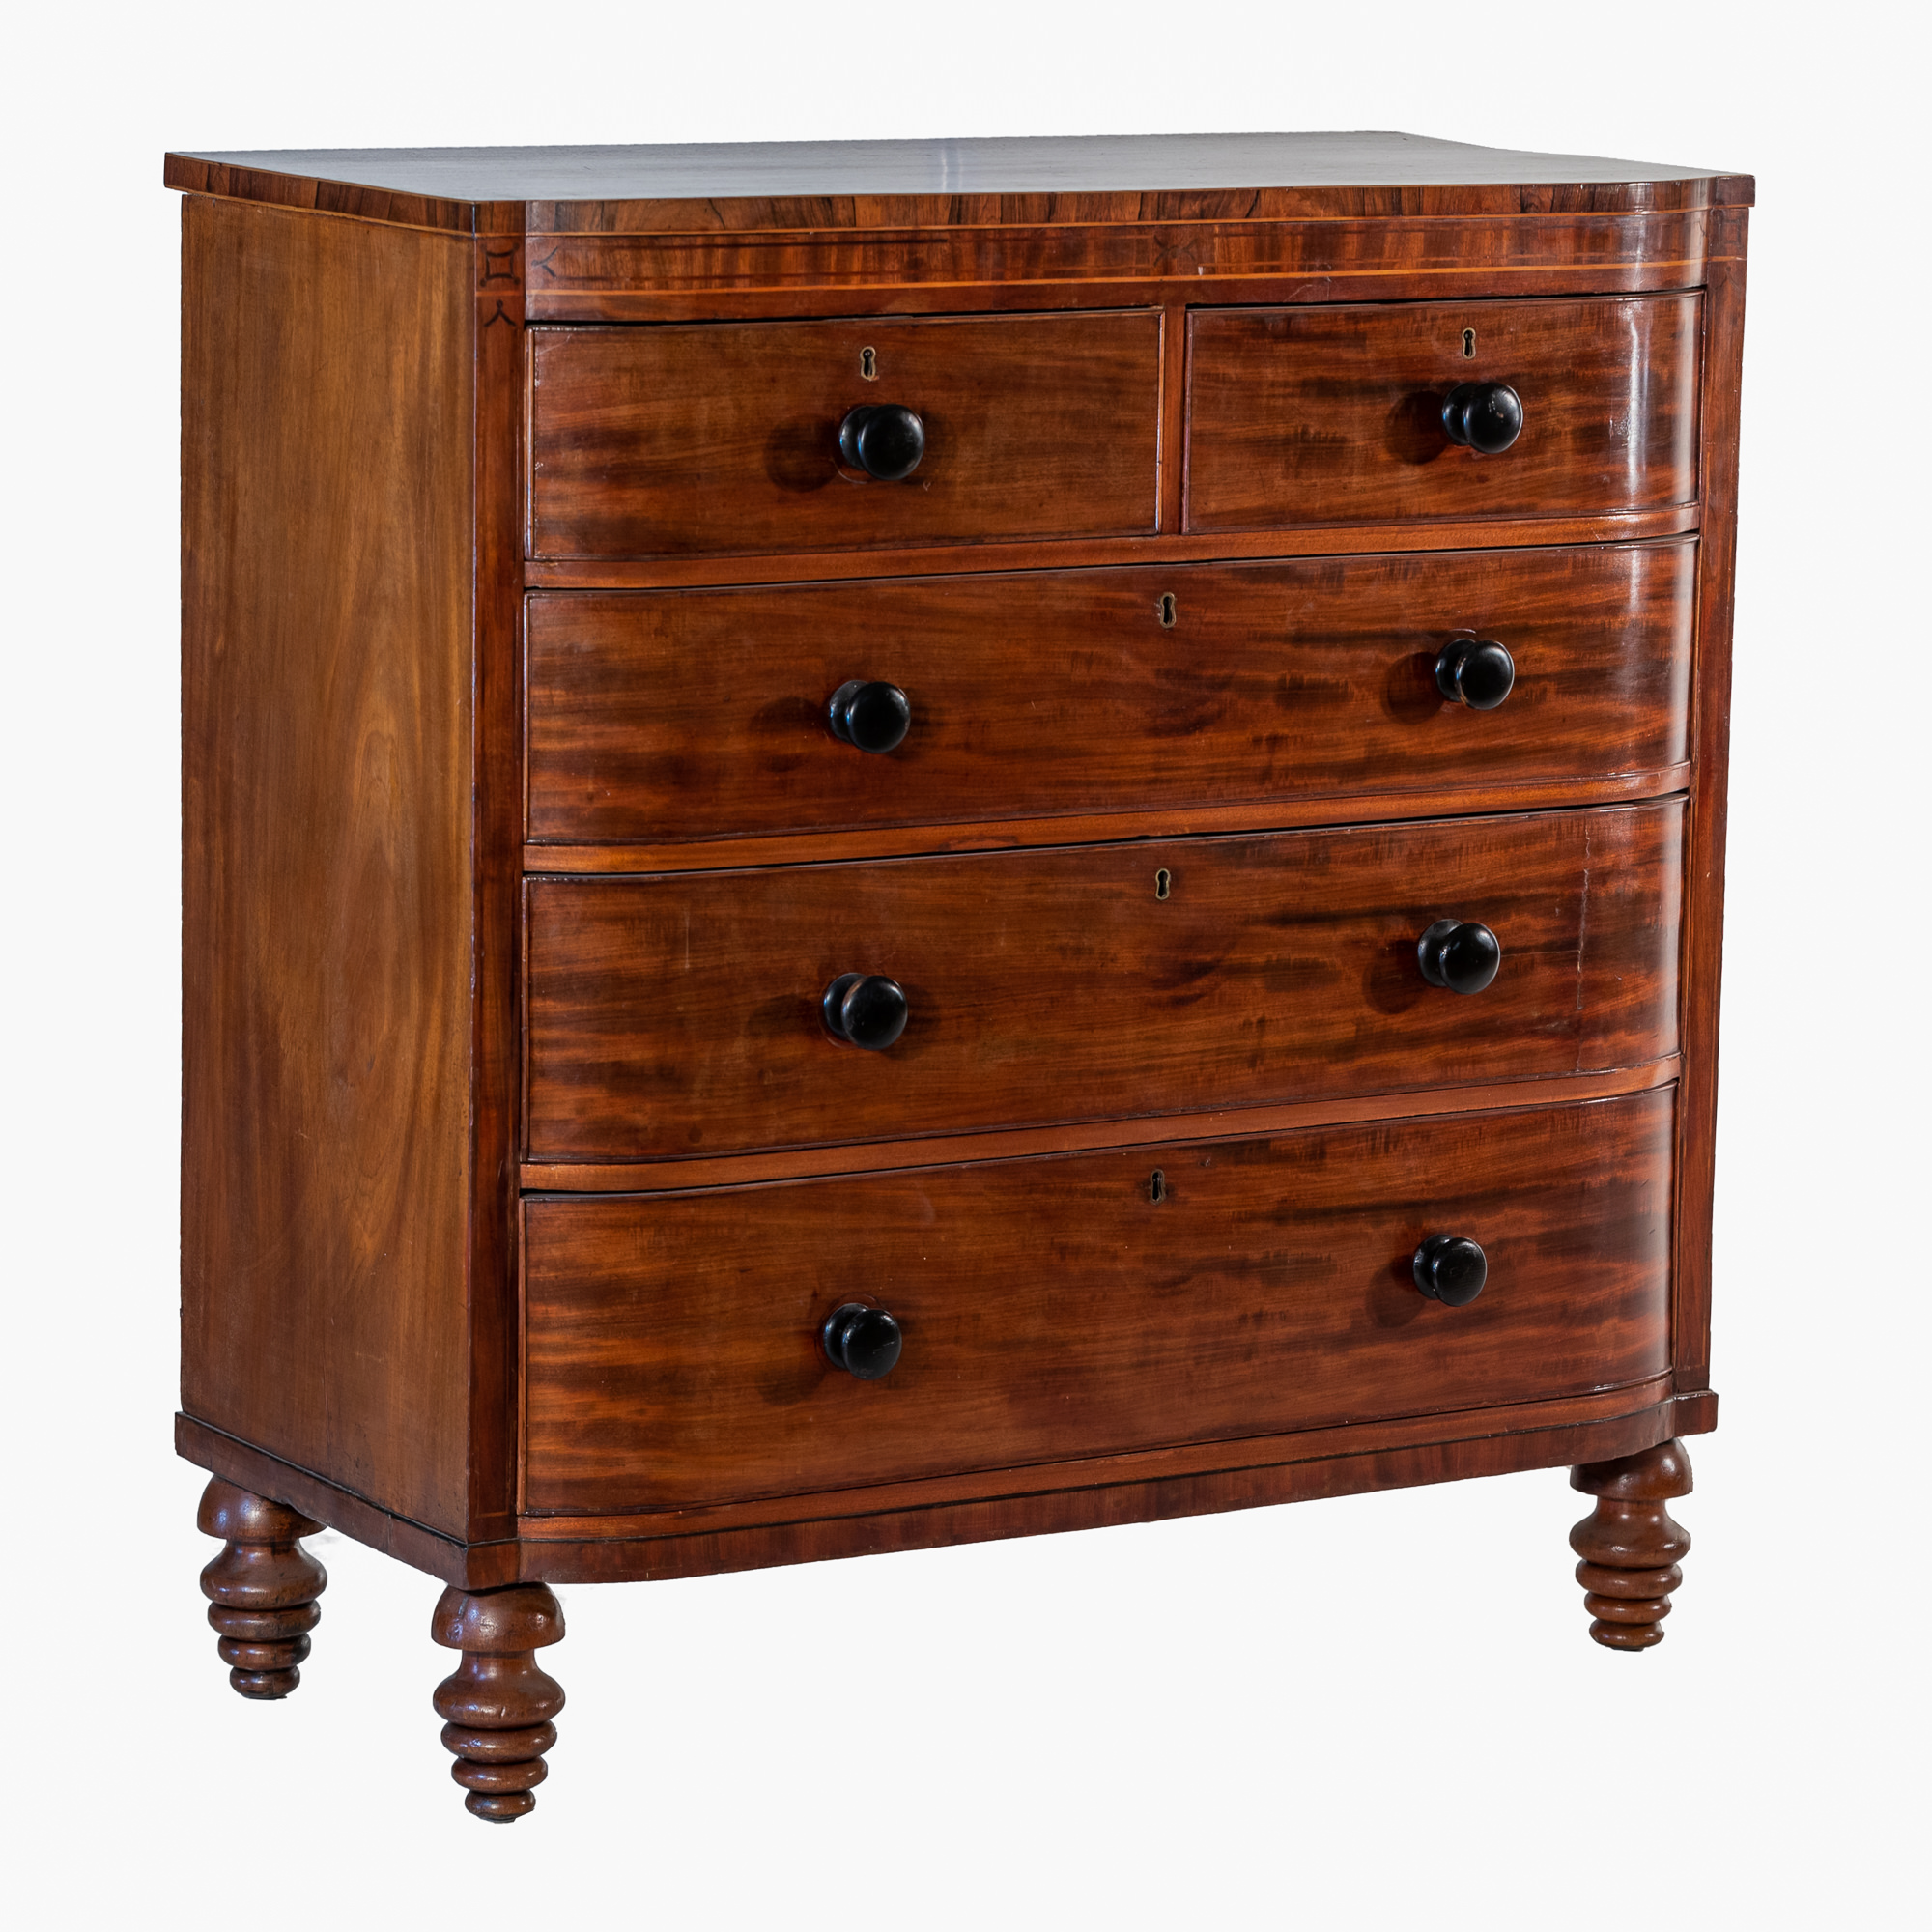 'George IV Rosewood Crossbanded and String Inlaid Mahogany Chest of Drawers Circa 1830'